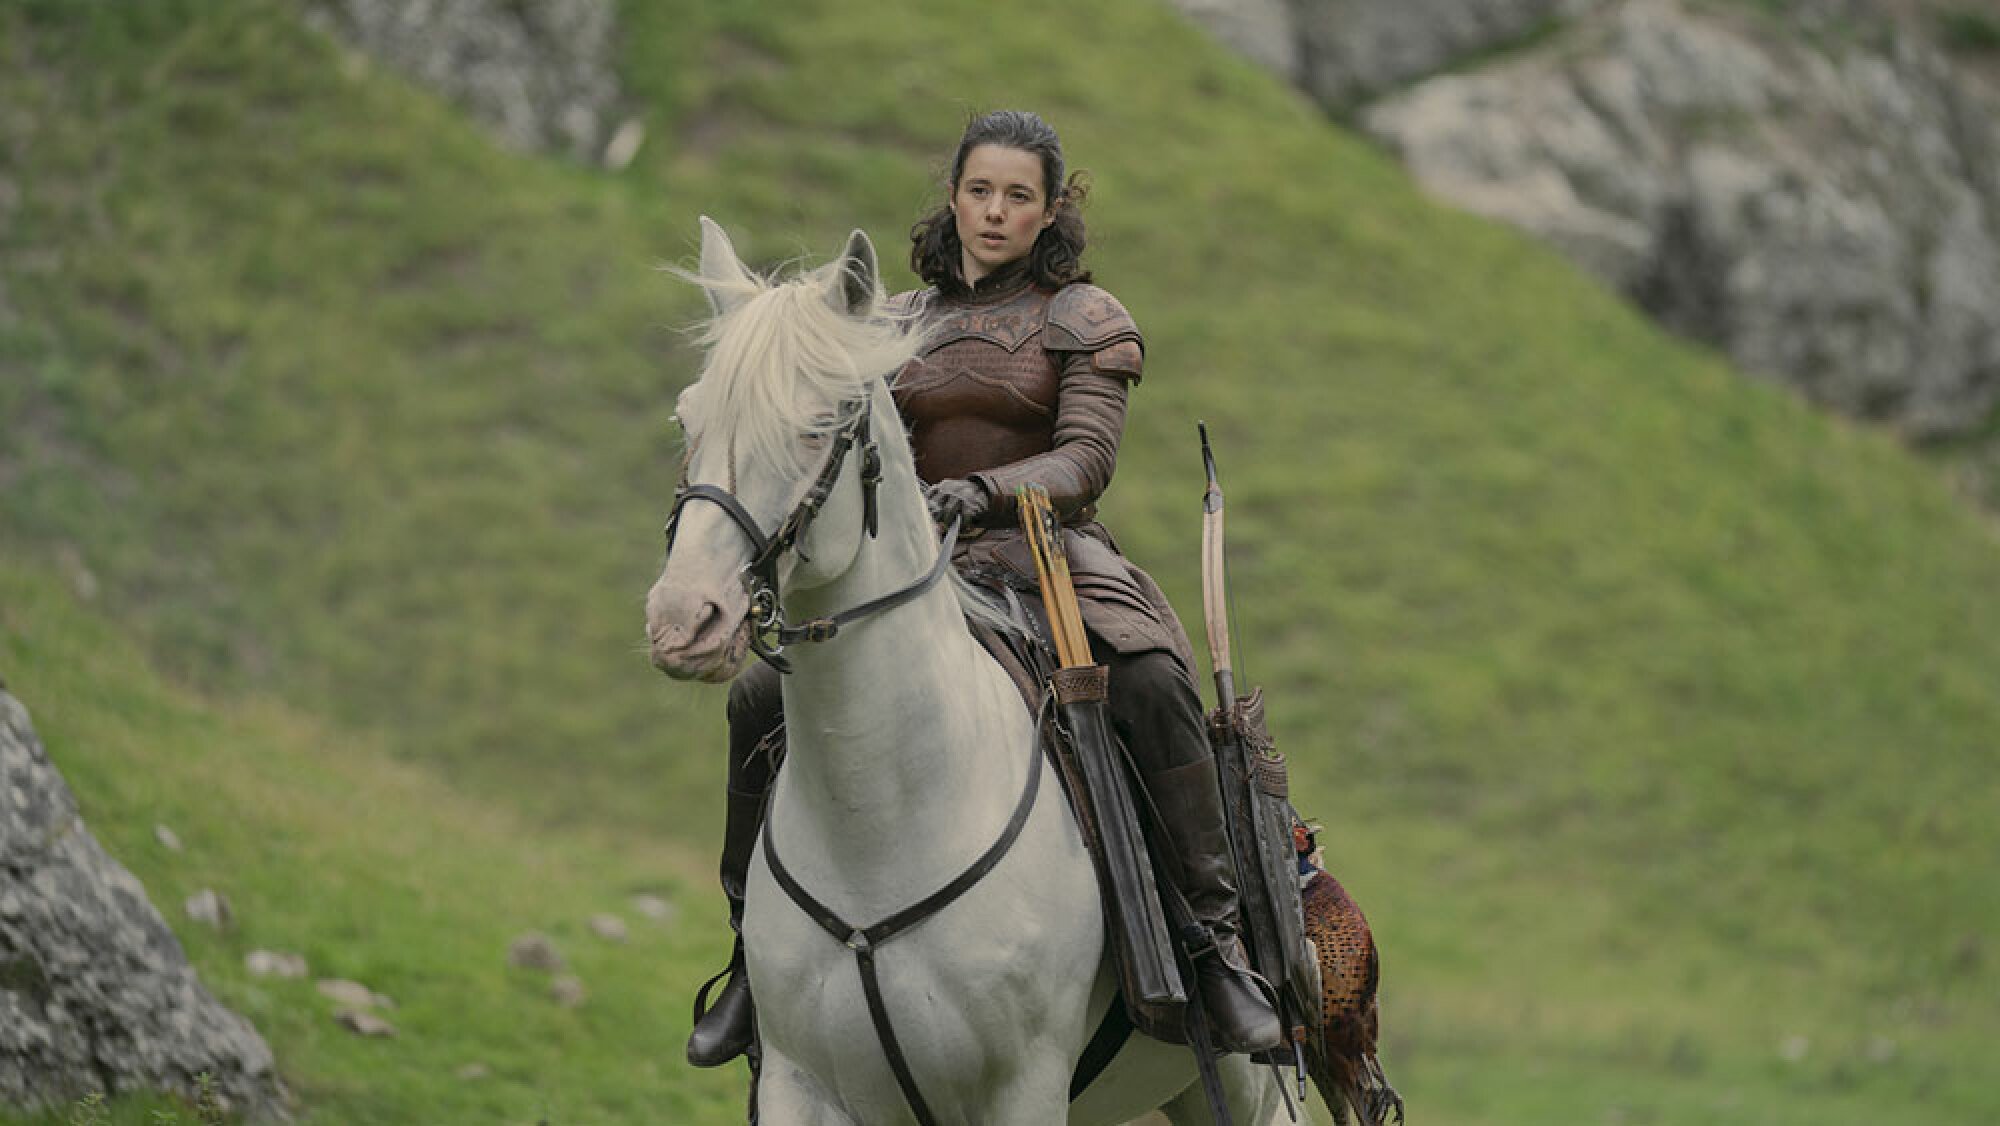 A woman in medieval clothing rides a white horse outdoors.